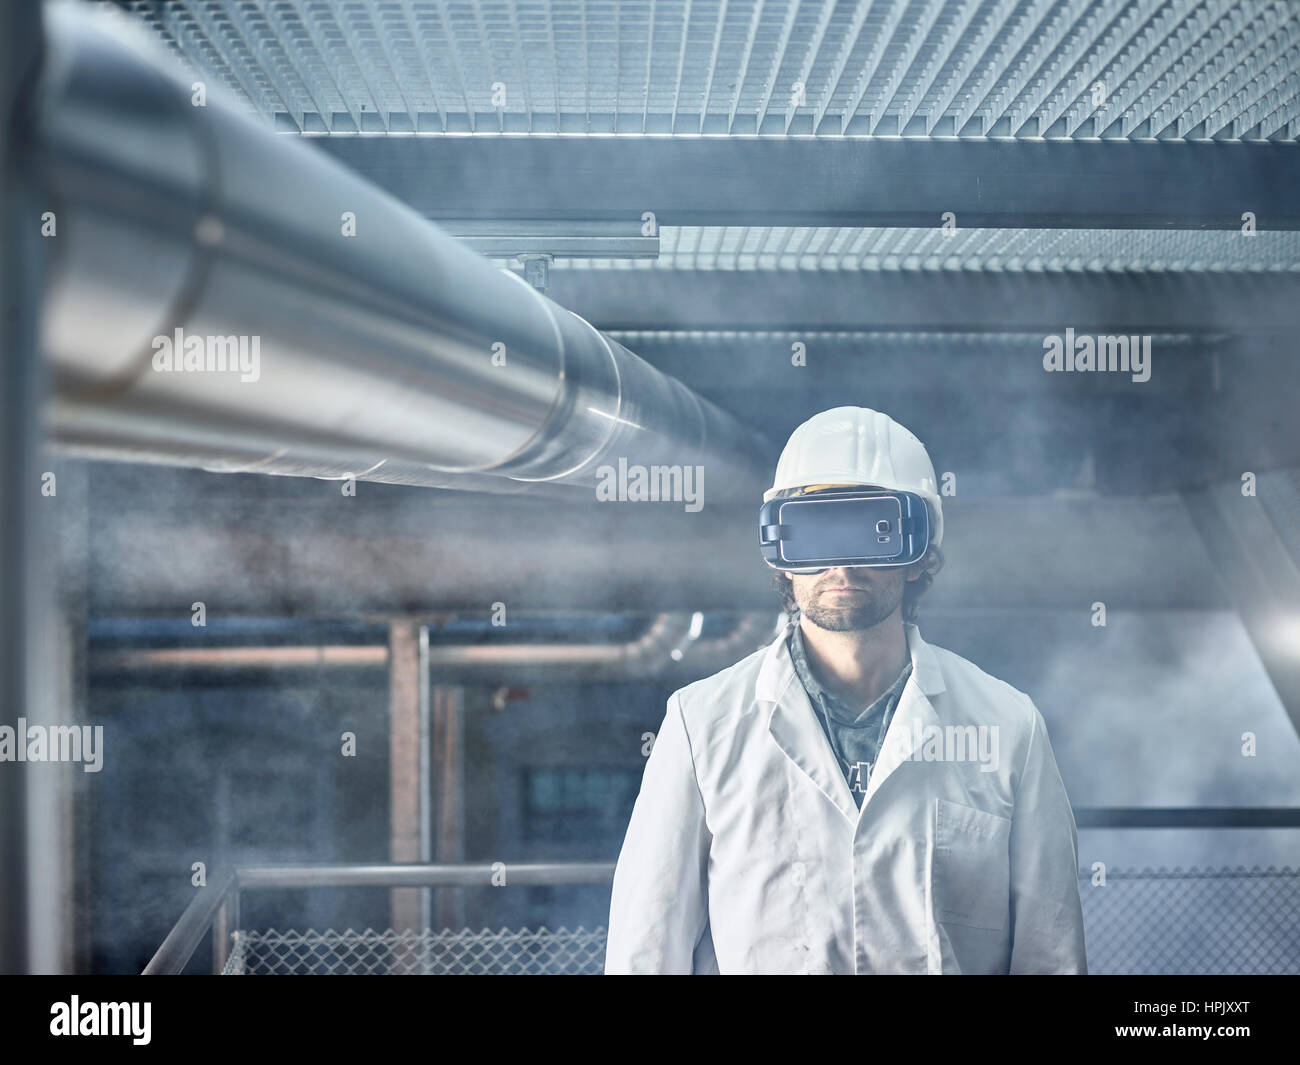 Man with VR goggles, white helmet and lab coat standing in front of industrial plant, Austria Stock Photo